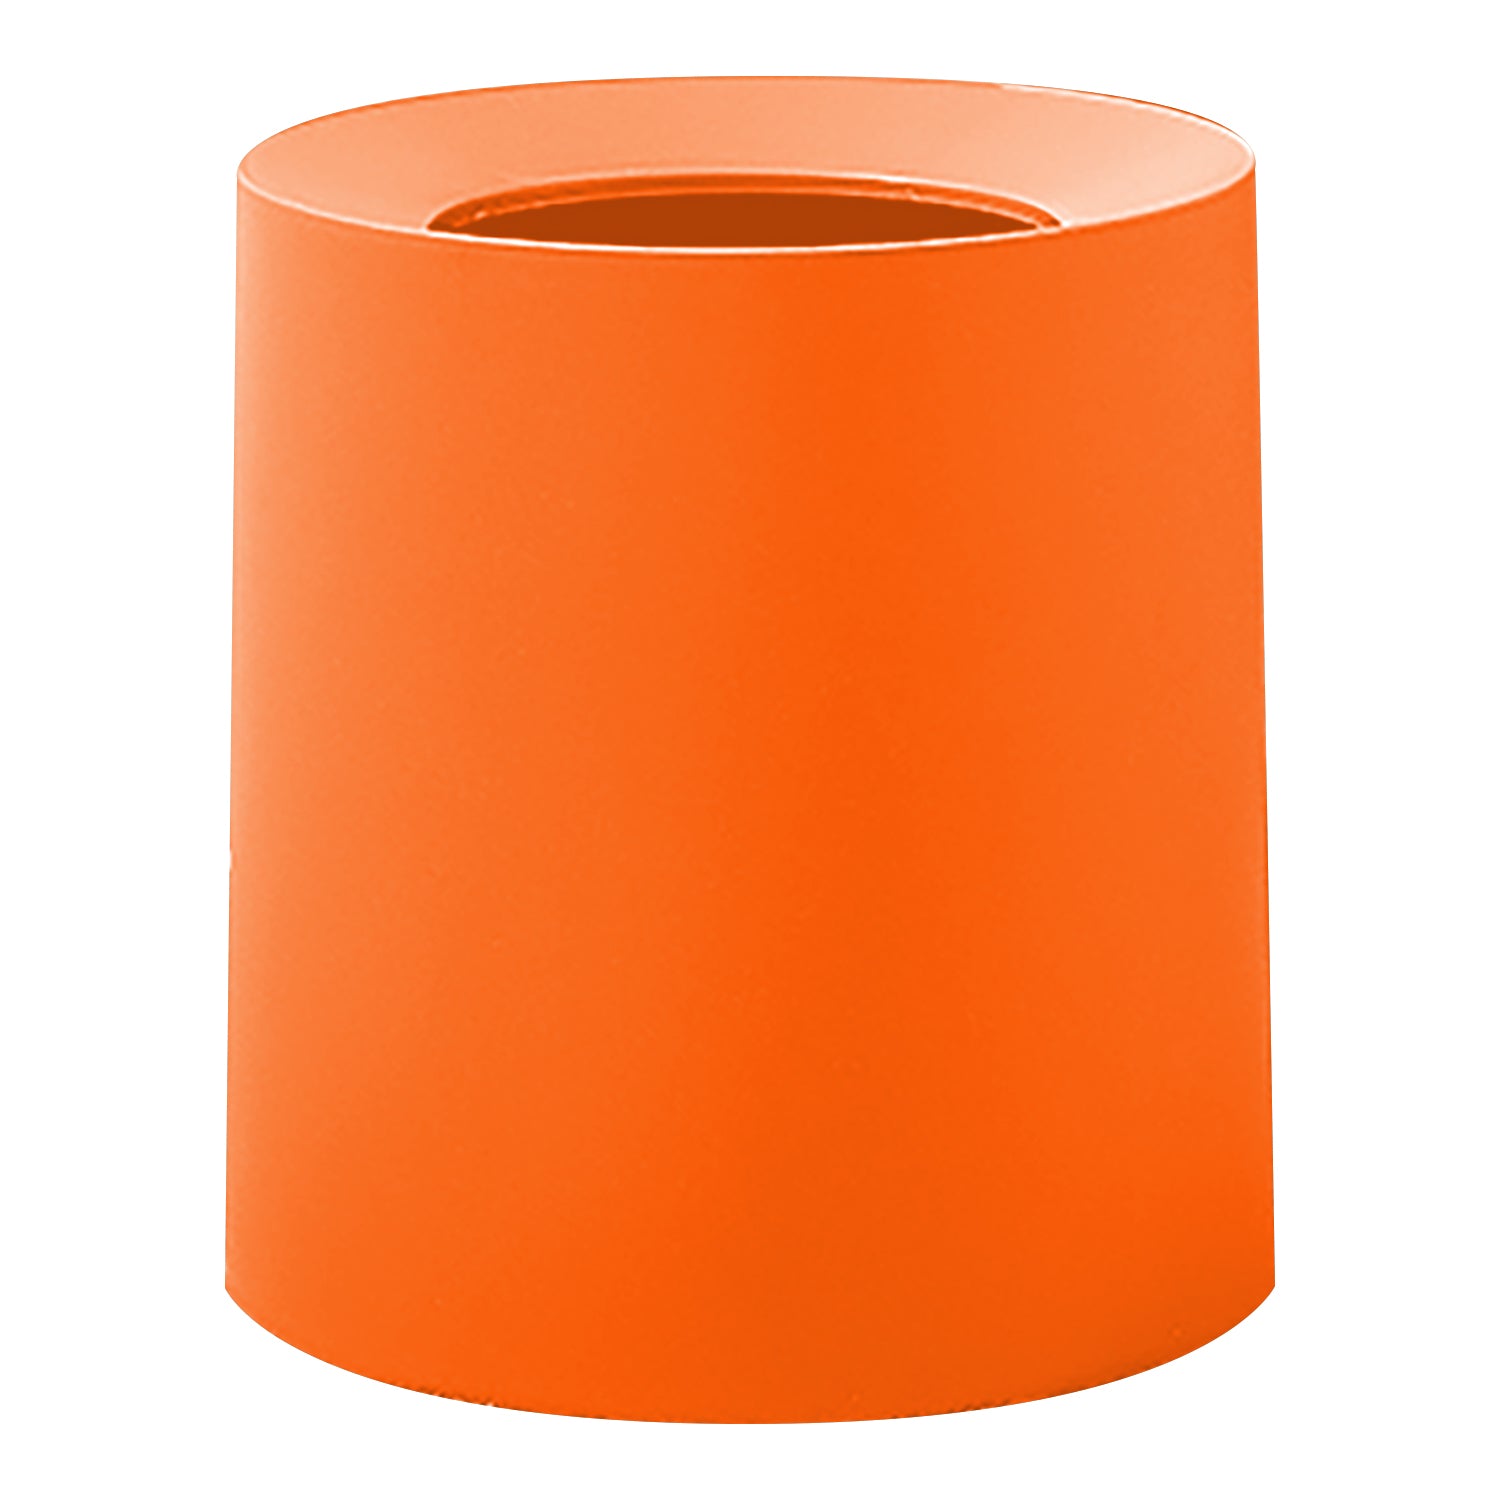 100 Counts / 5 Rolls 2-4 Gallon Small Trash Bags Waste Basket Liners Orange